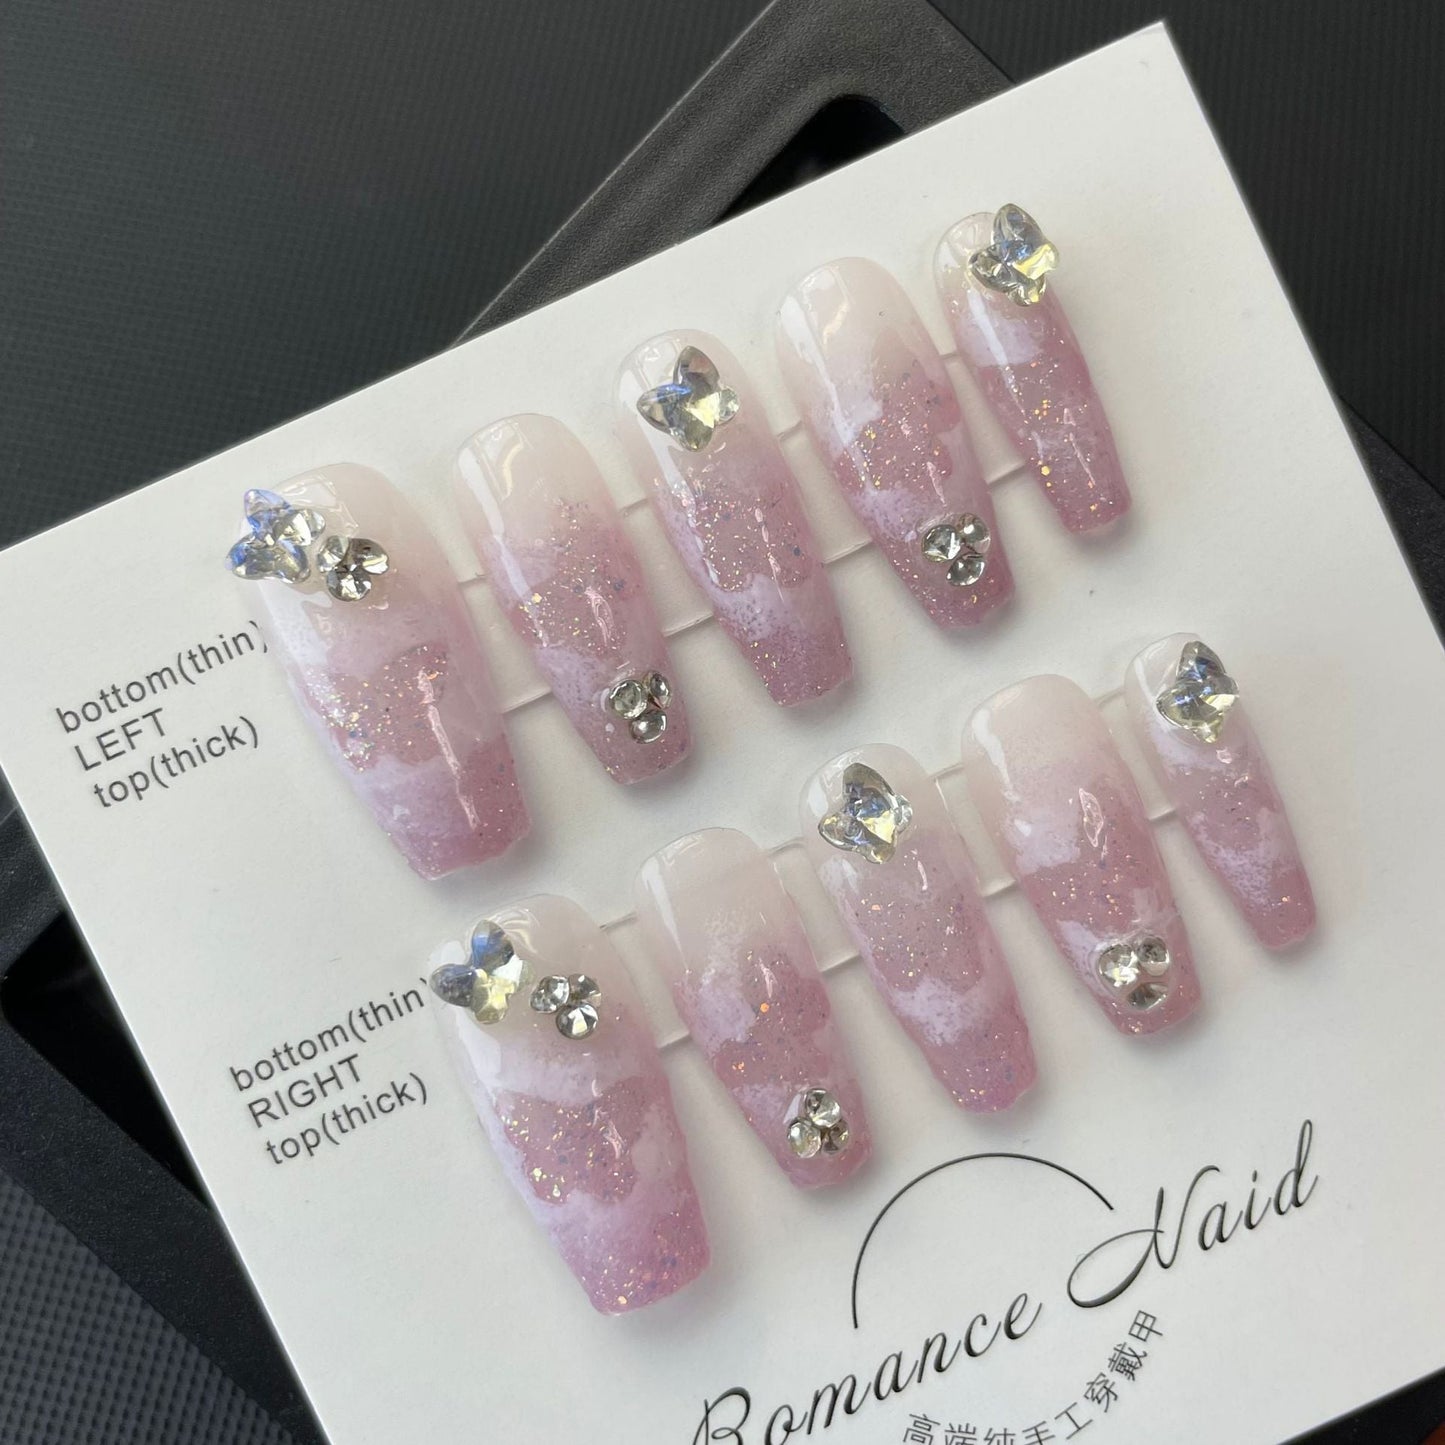 685 Butterfly style press on nails 100% handmade false nails purple pink